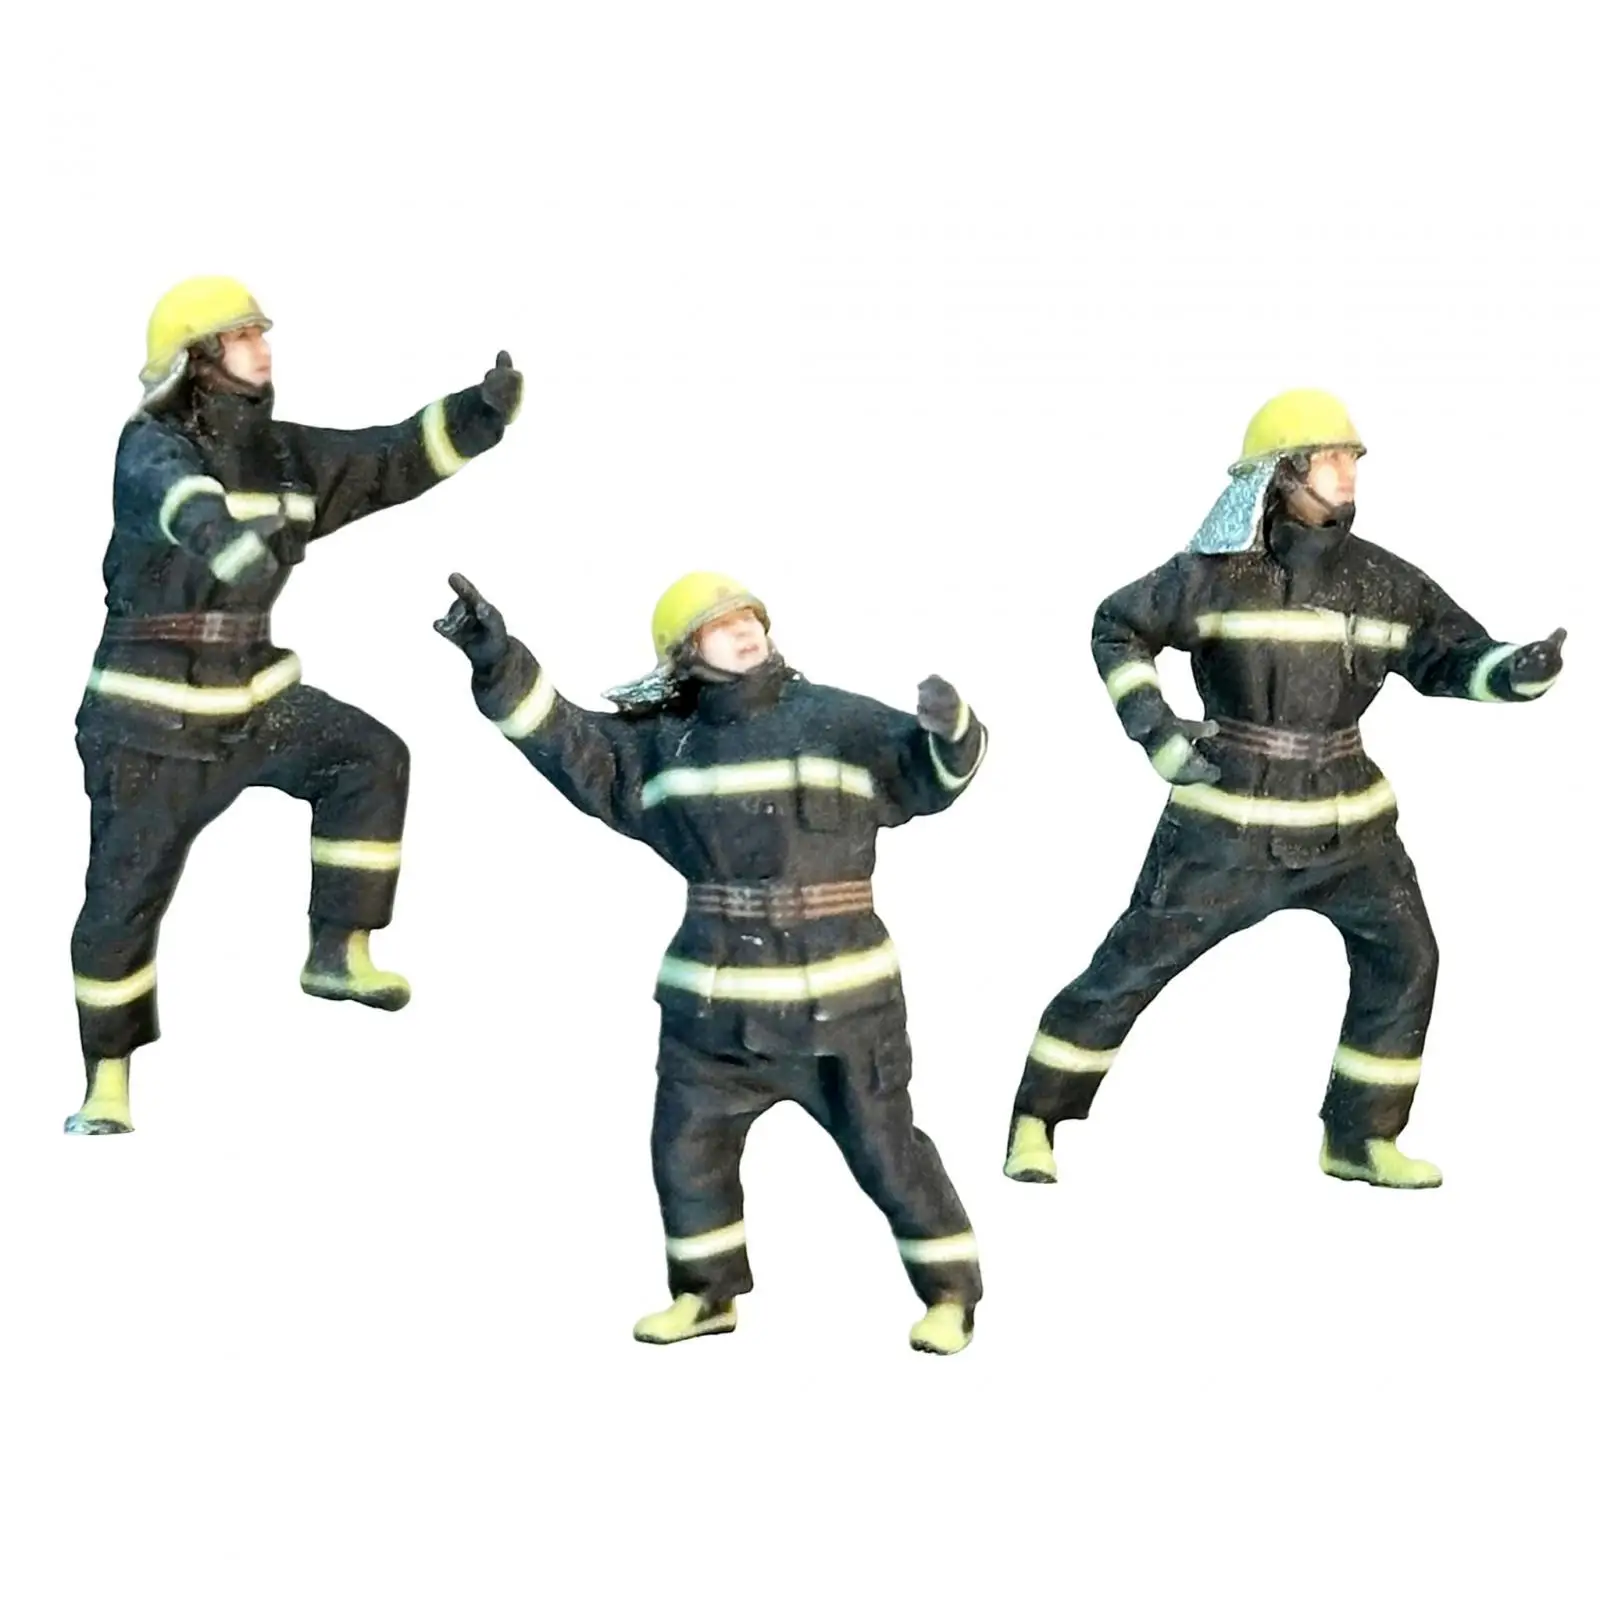 3 Pieces Miniature Firefighter Figures Realistic Tiny People Model for Miniature Scene Photography Props Diorama Layout Decor